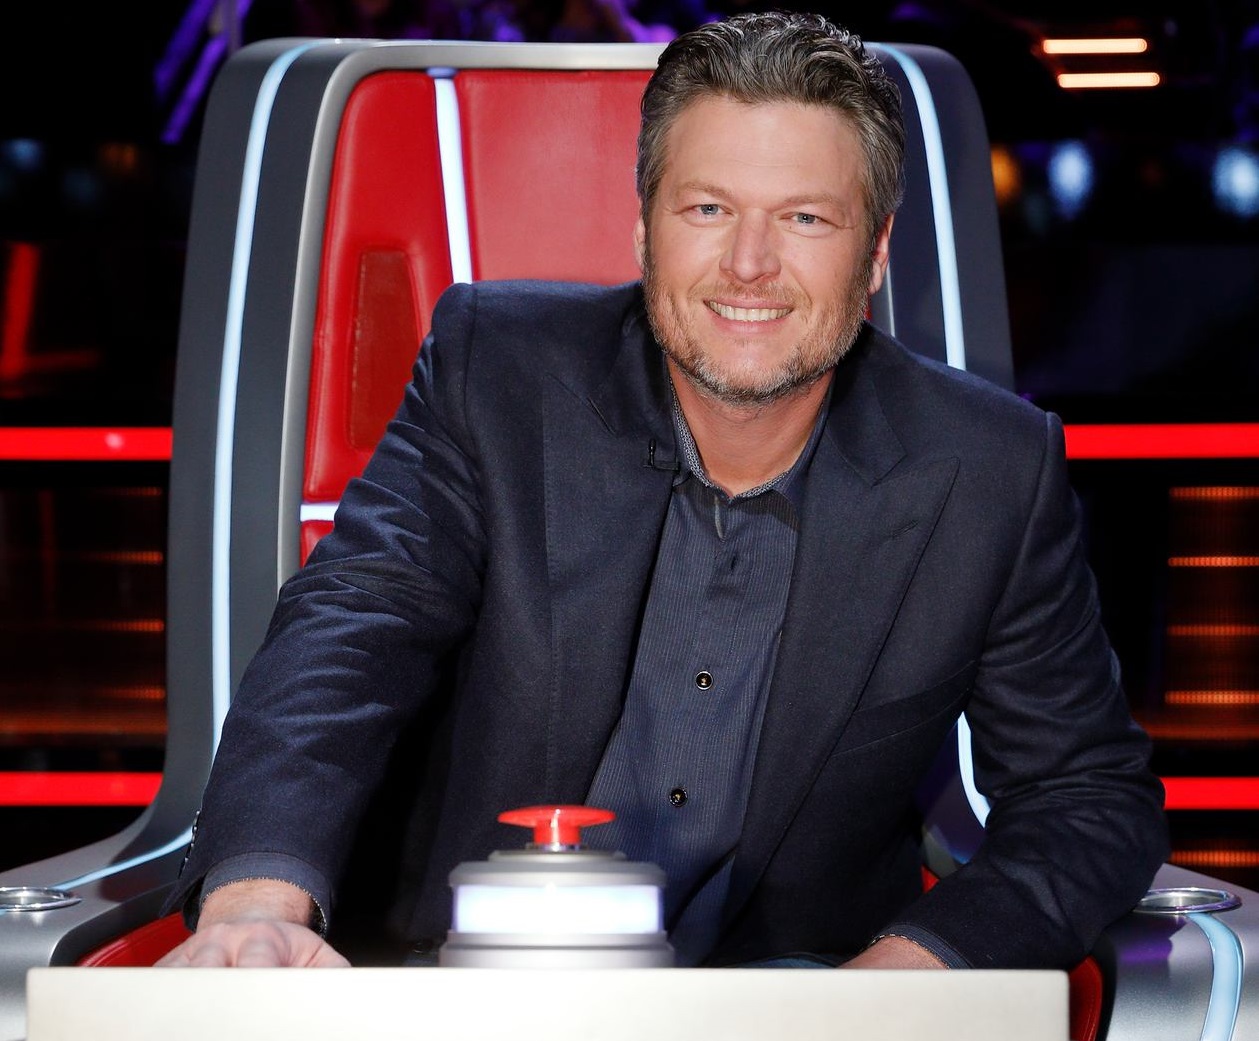 Blake Shelton Signs on for 16th Season of ‘The Voice’